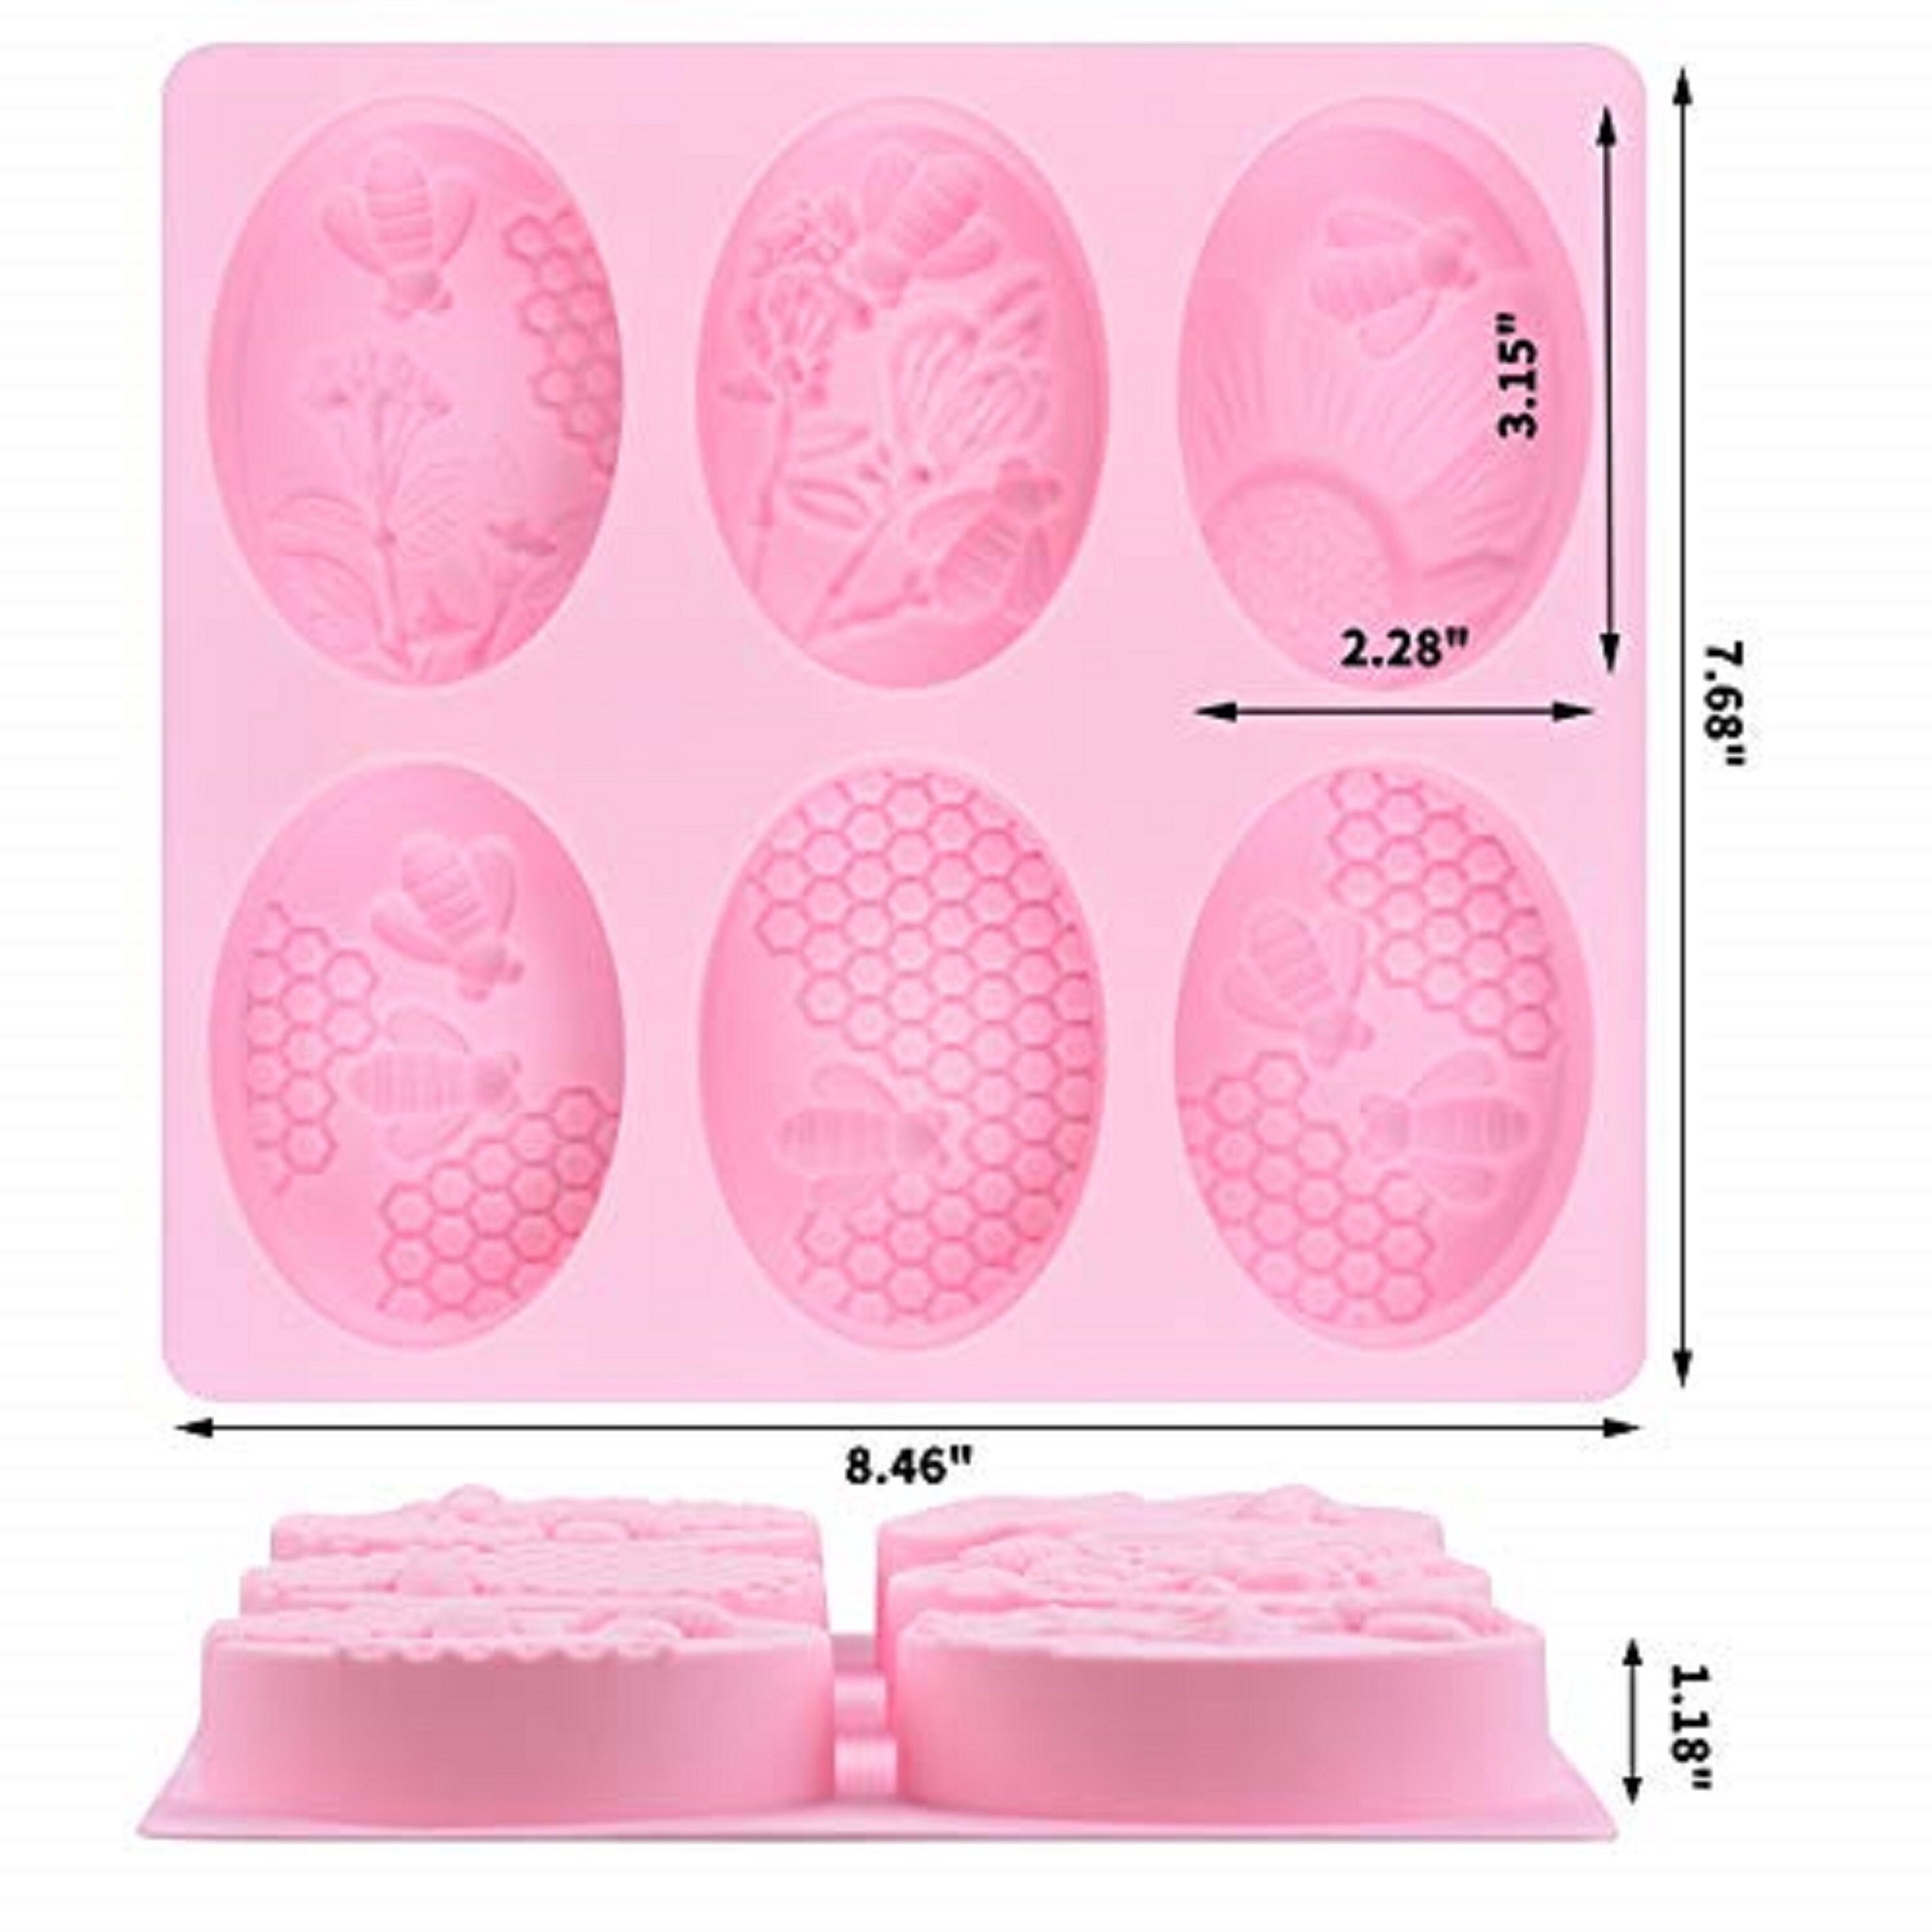 Honeycomb Shape Silicone Ice Cube Molds Icing Silicone Mold Honey Soap Molds  Silicone Molds Soap Mold Baking Pan 19 Cavities Multipurpose Soap Molds F